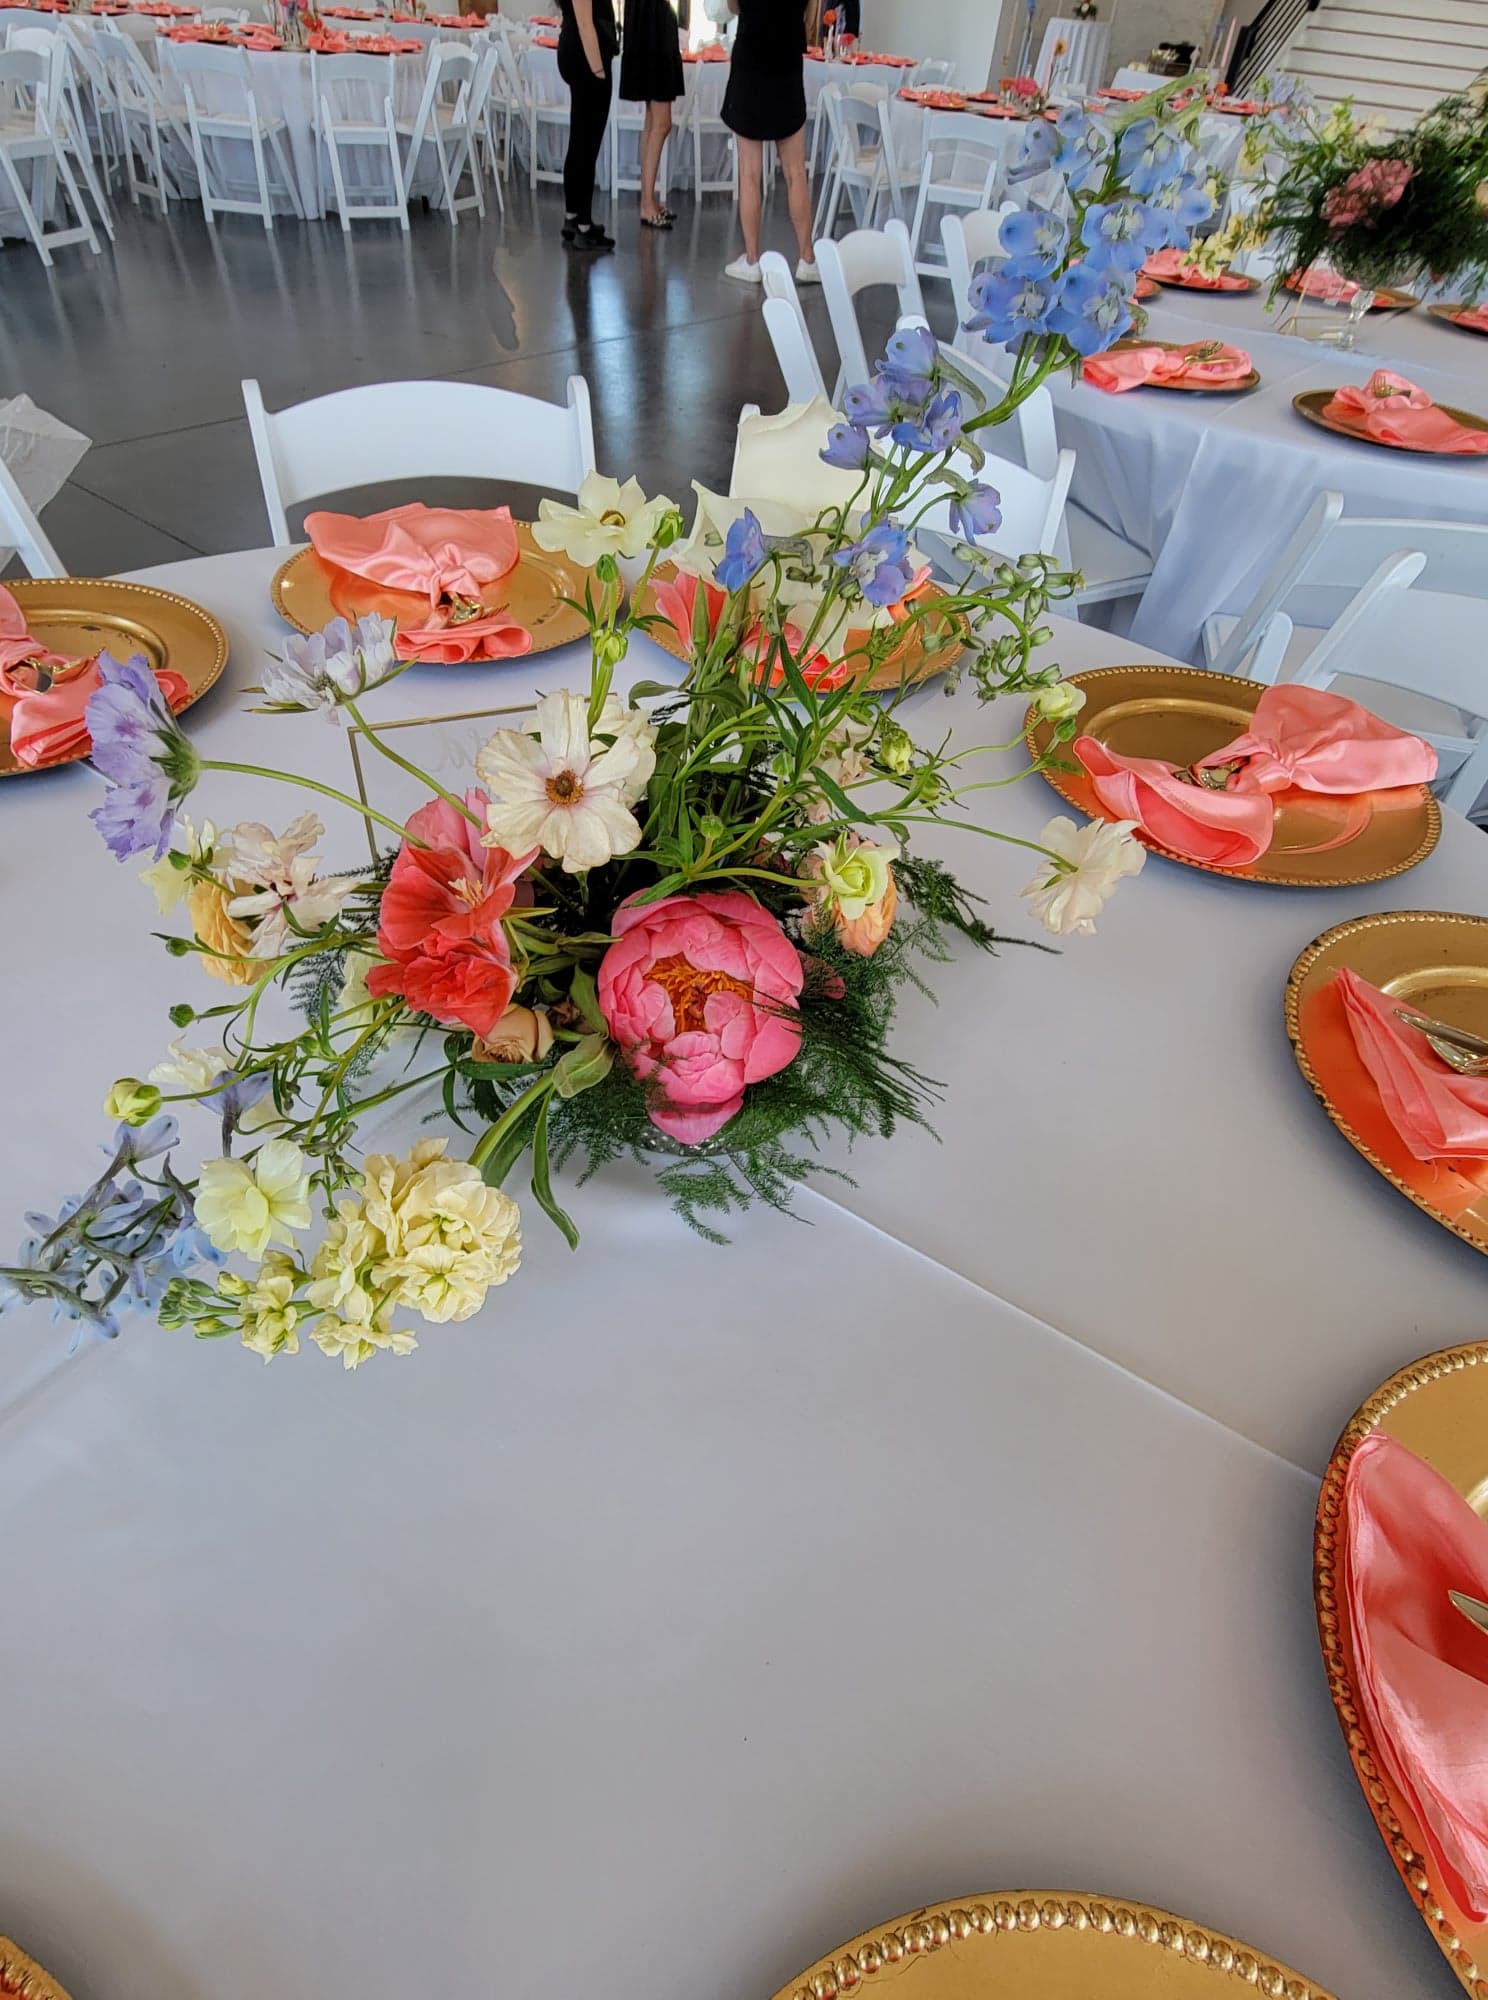 plated dinner set up for a wedding with a floral arrangement on white tablecloth with gold chargers and peach colored cloth napkins